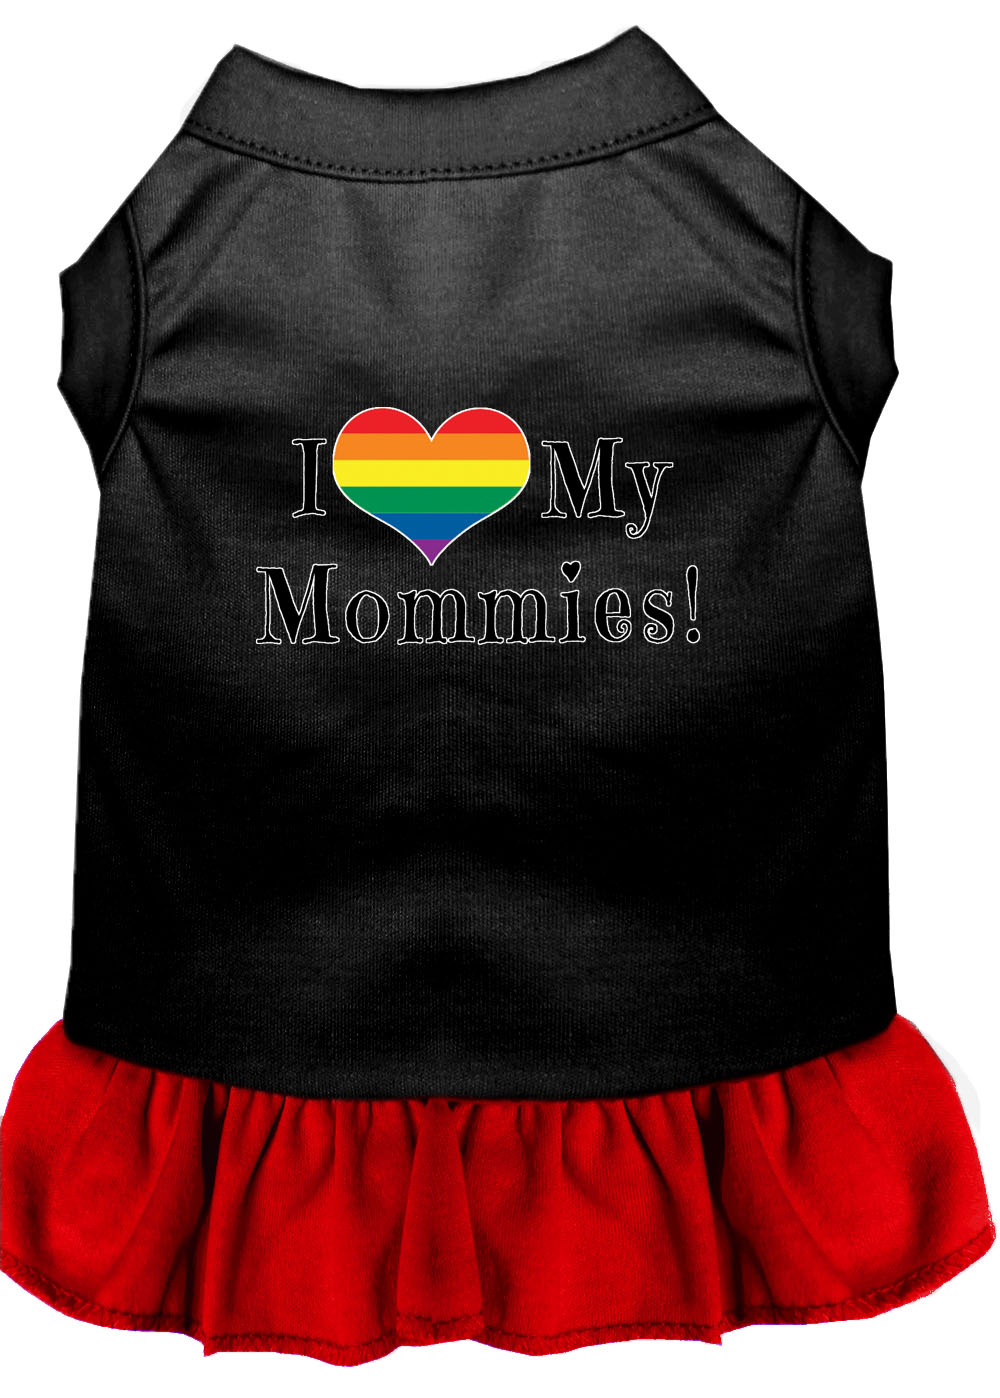 I Heart my Mommies Screen Print Dog Dress Black with Red Med